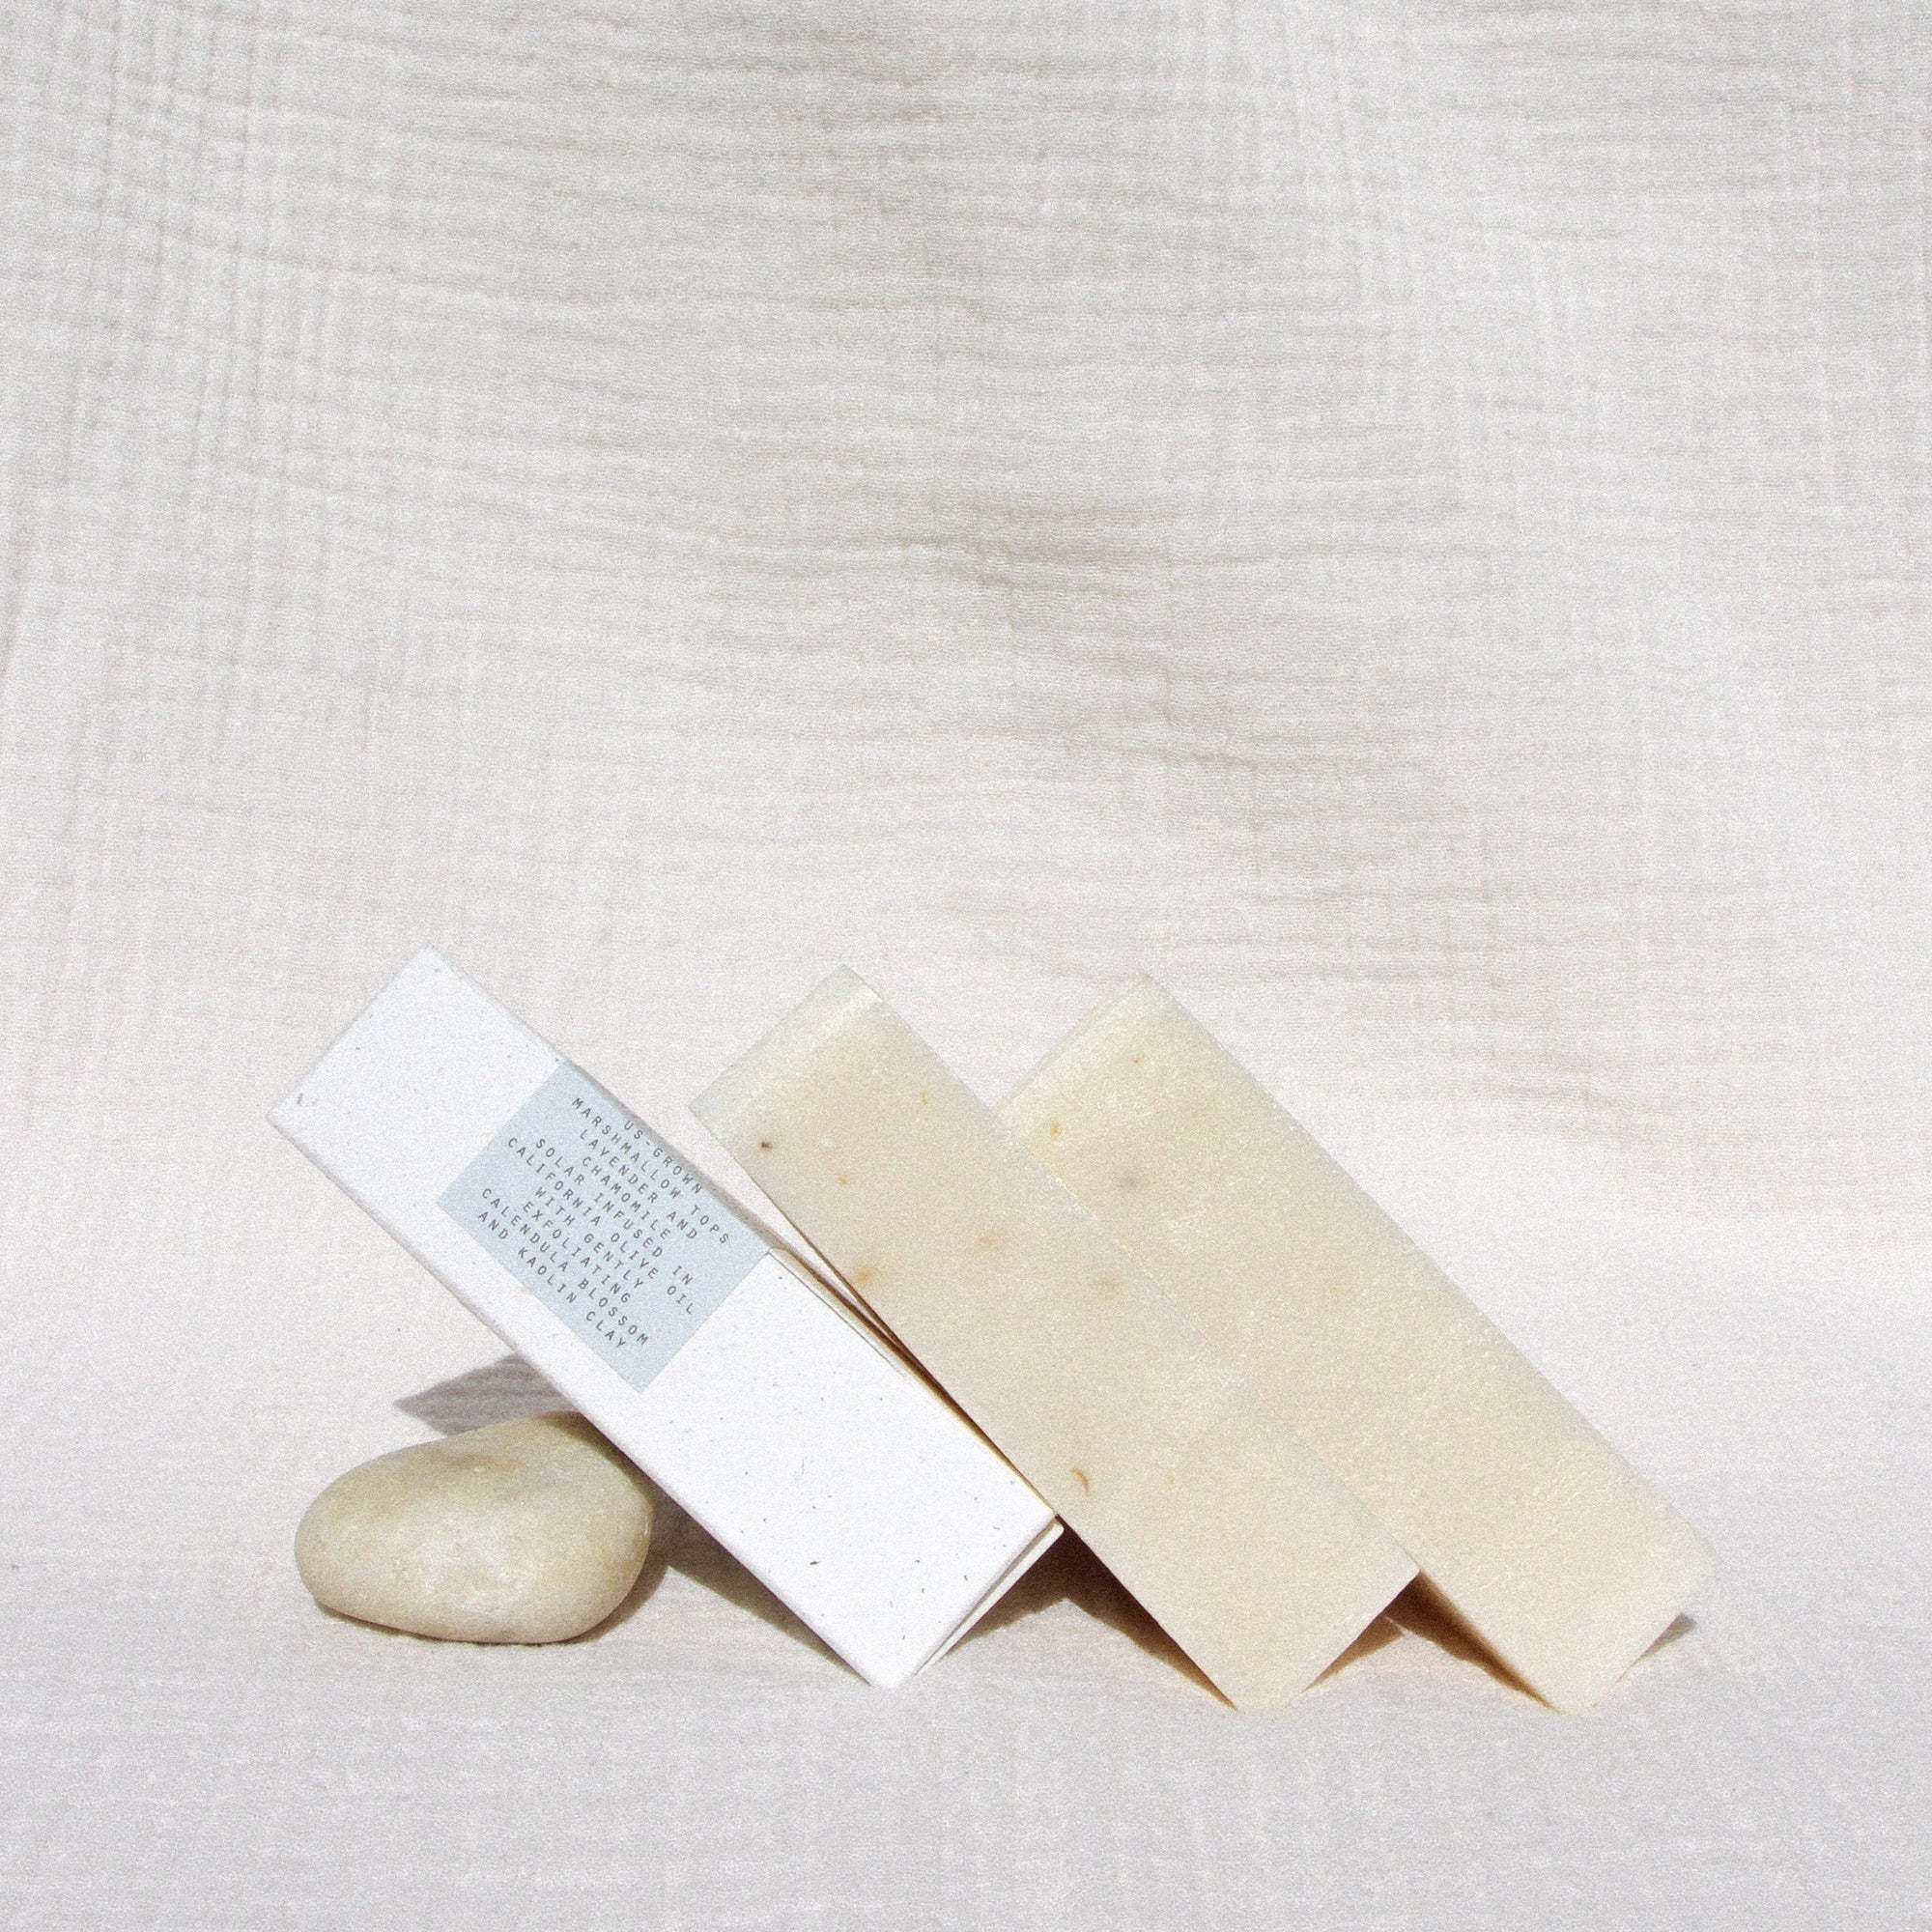 Three triangle soaps leaning against a stone